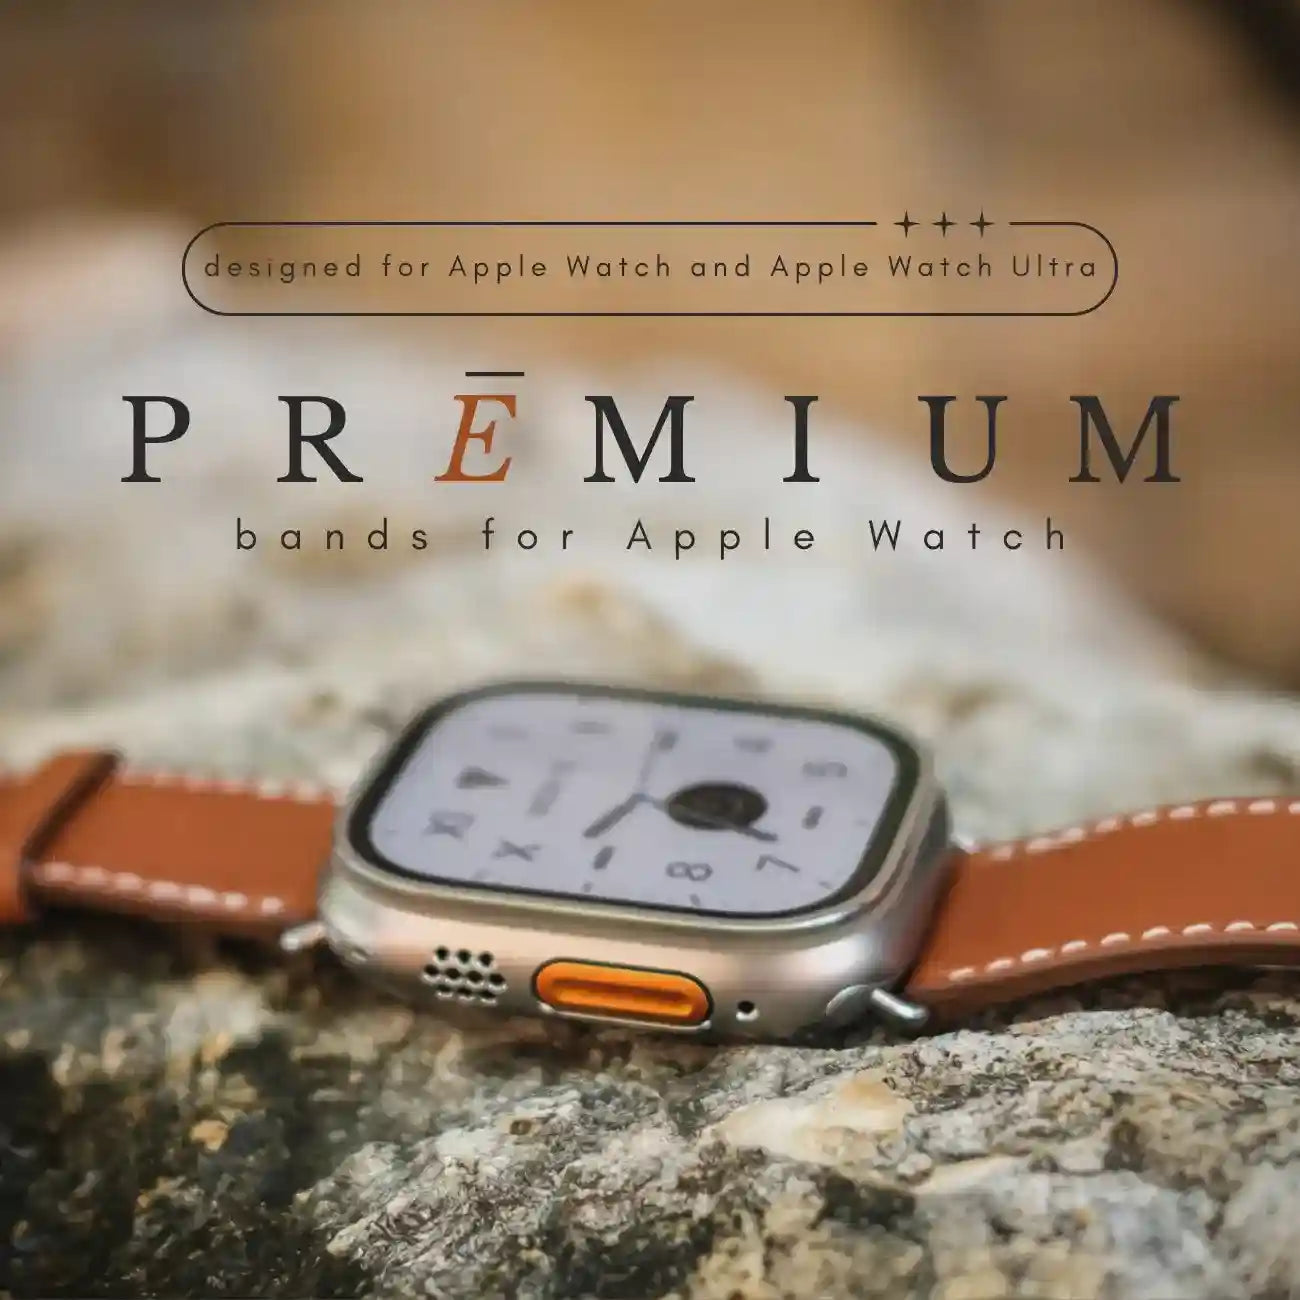 Banner Image for Infinity Loops Apple Watch band store. Infinity loops sells premium titanium steel and leather Apple Watch bands 